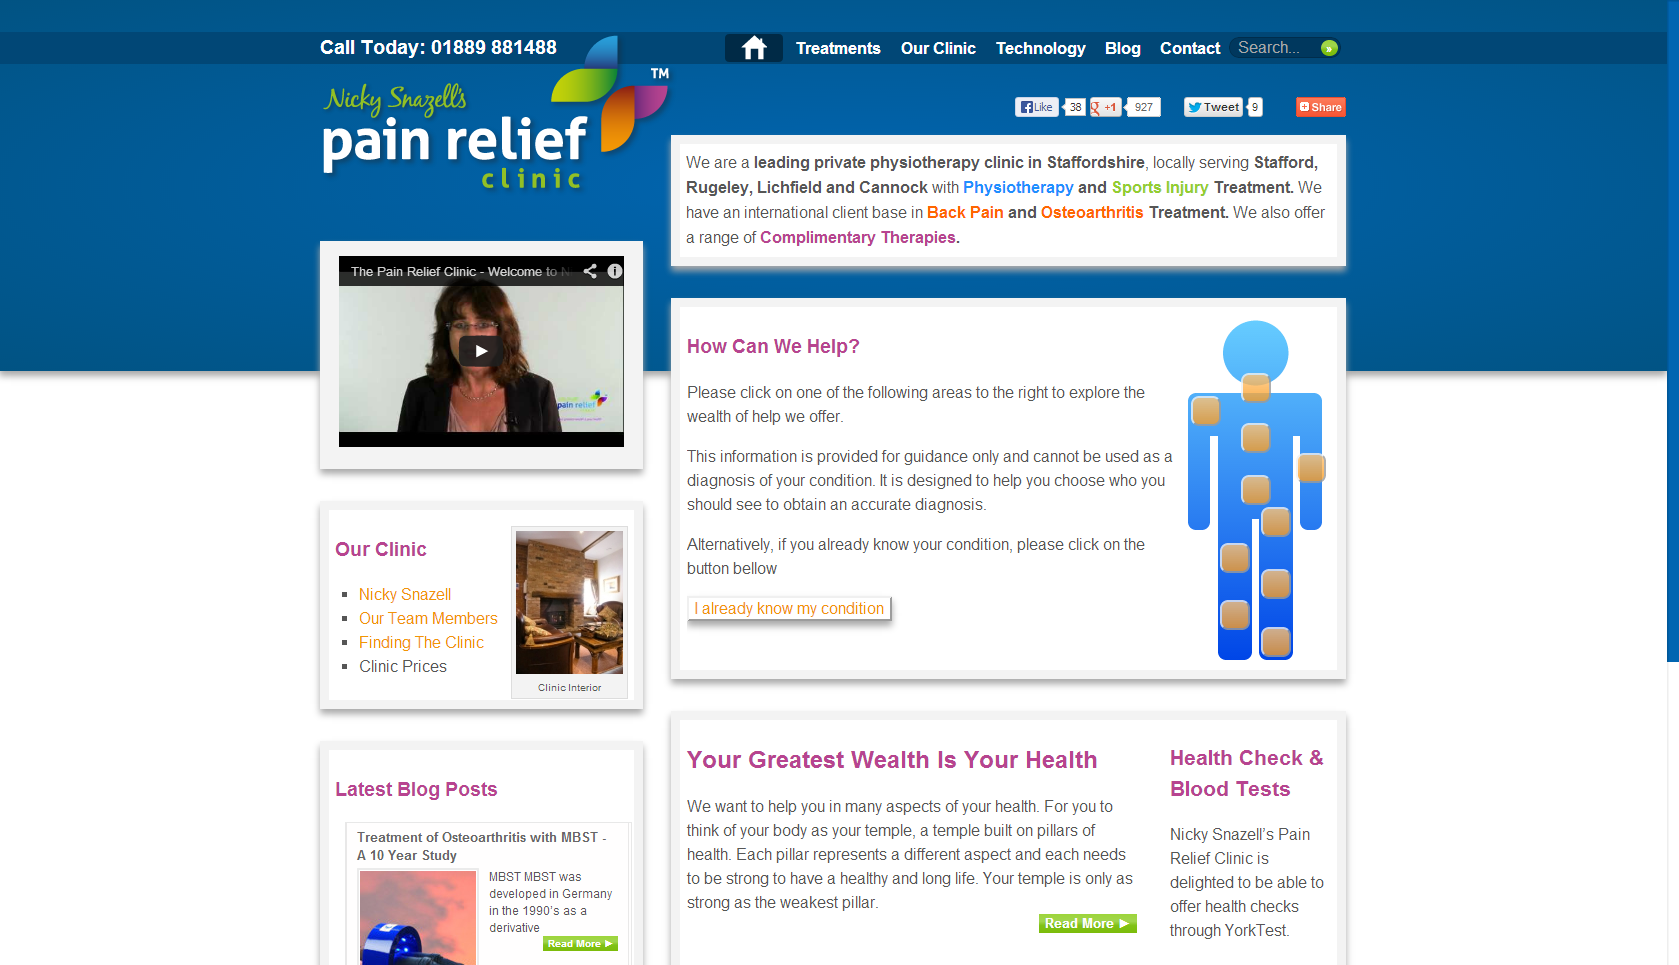 Nicky Snazell's Pain Relief Clinic 2013